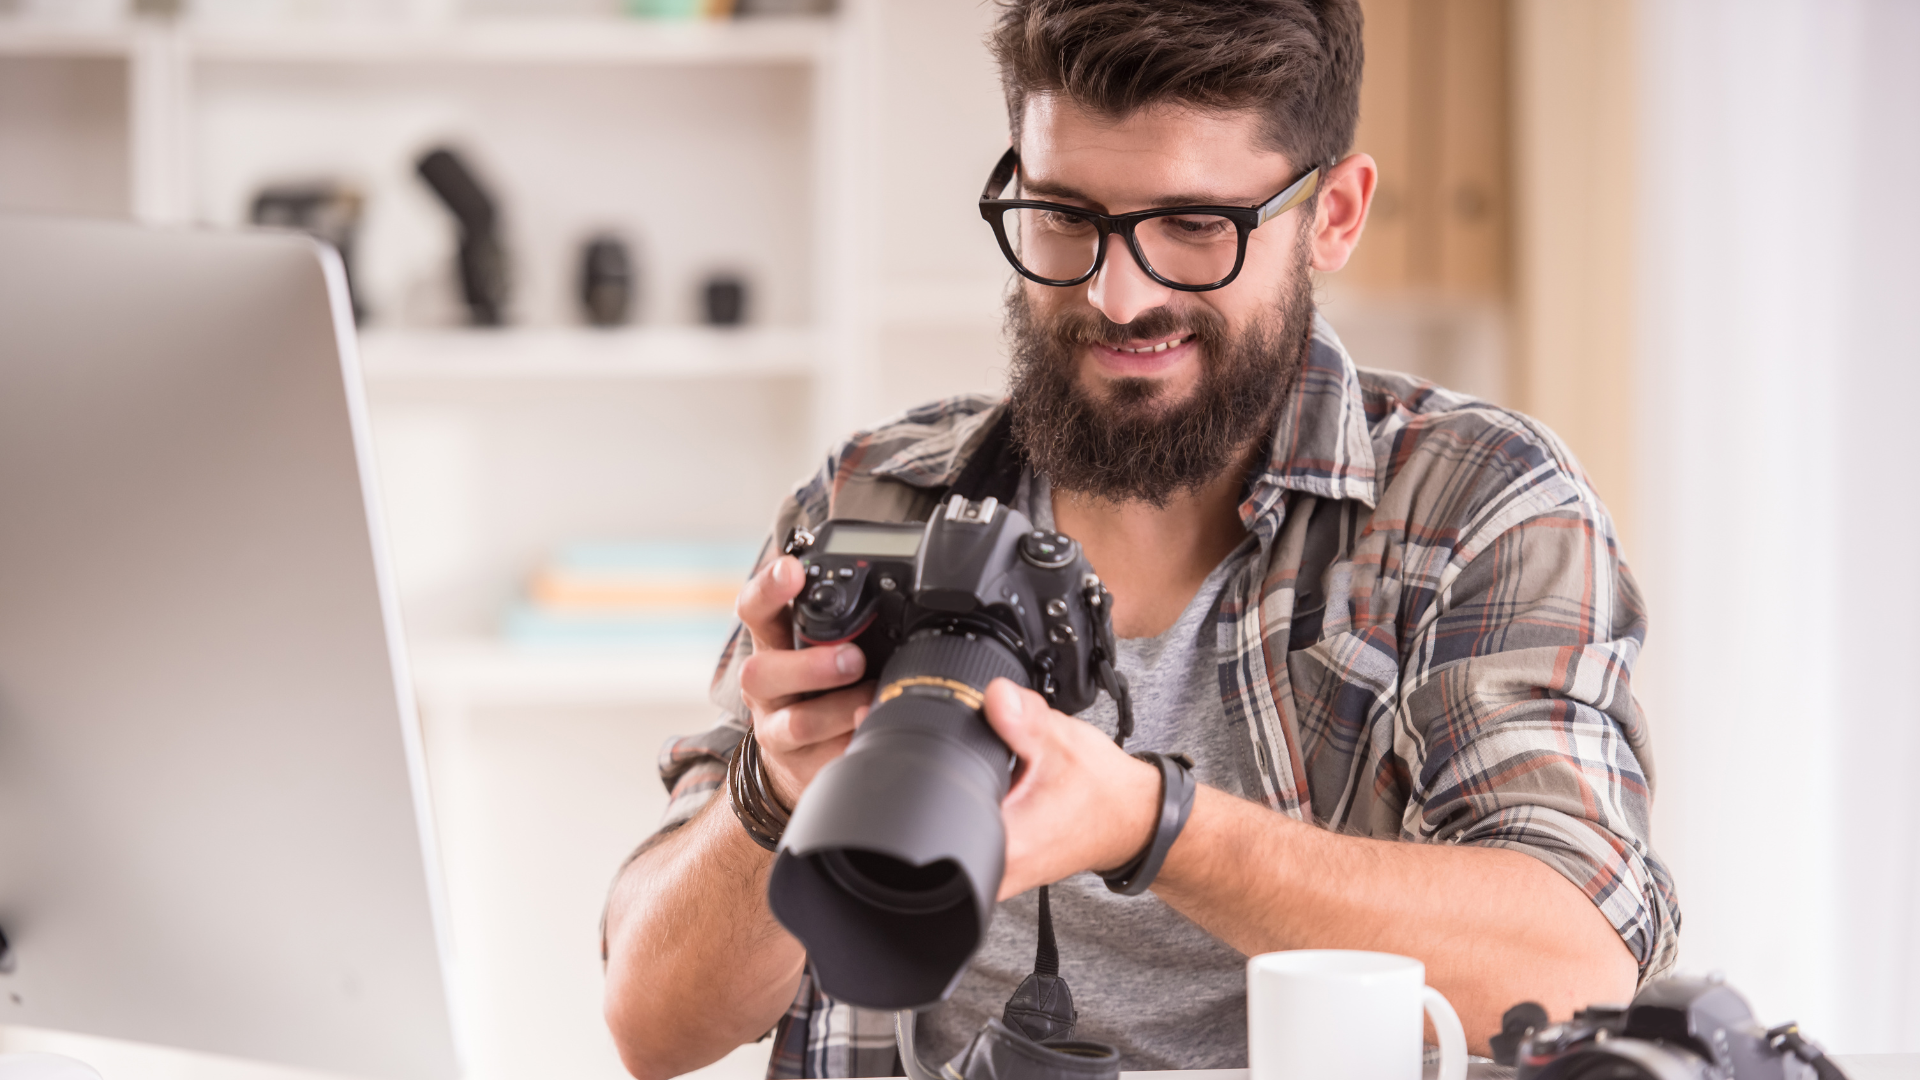 How to Take Candid Photographs